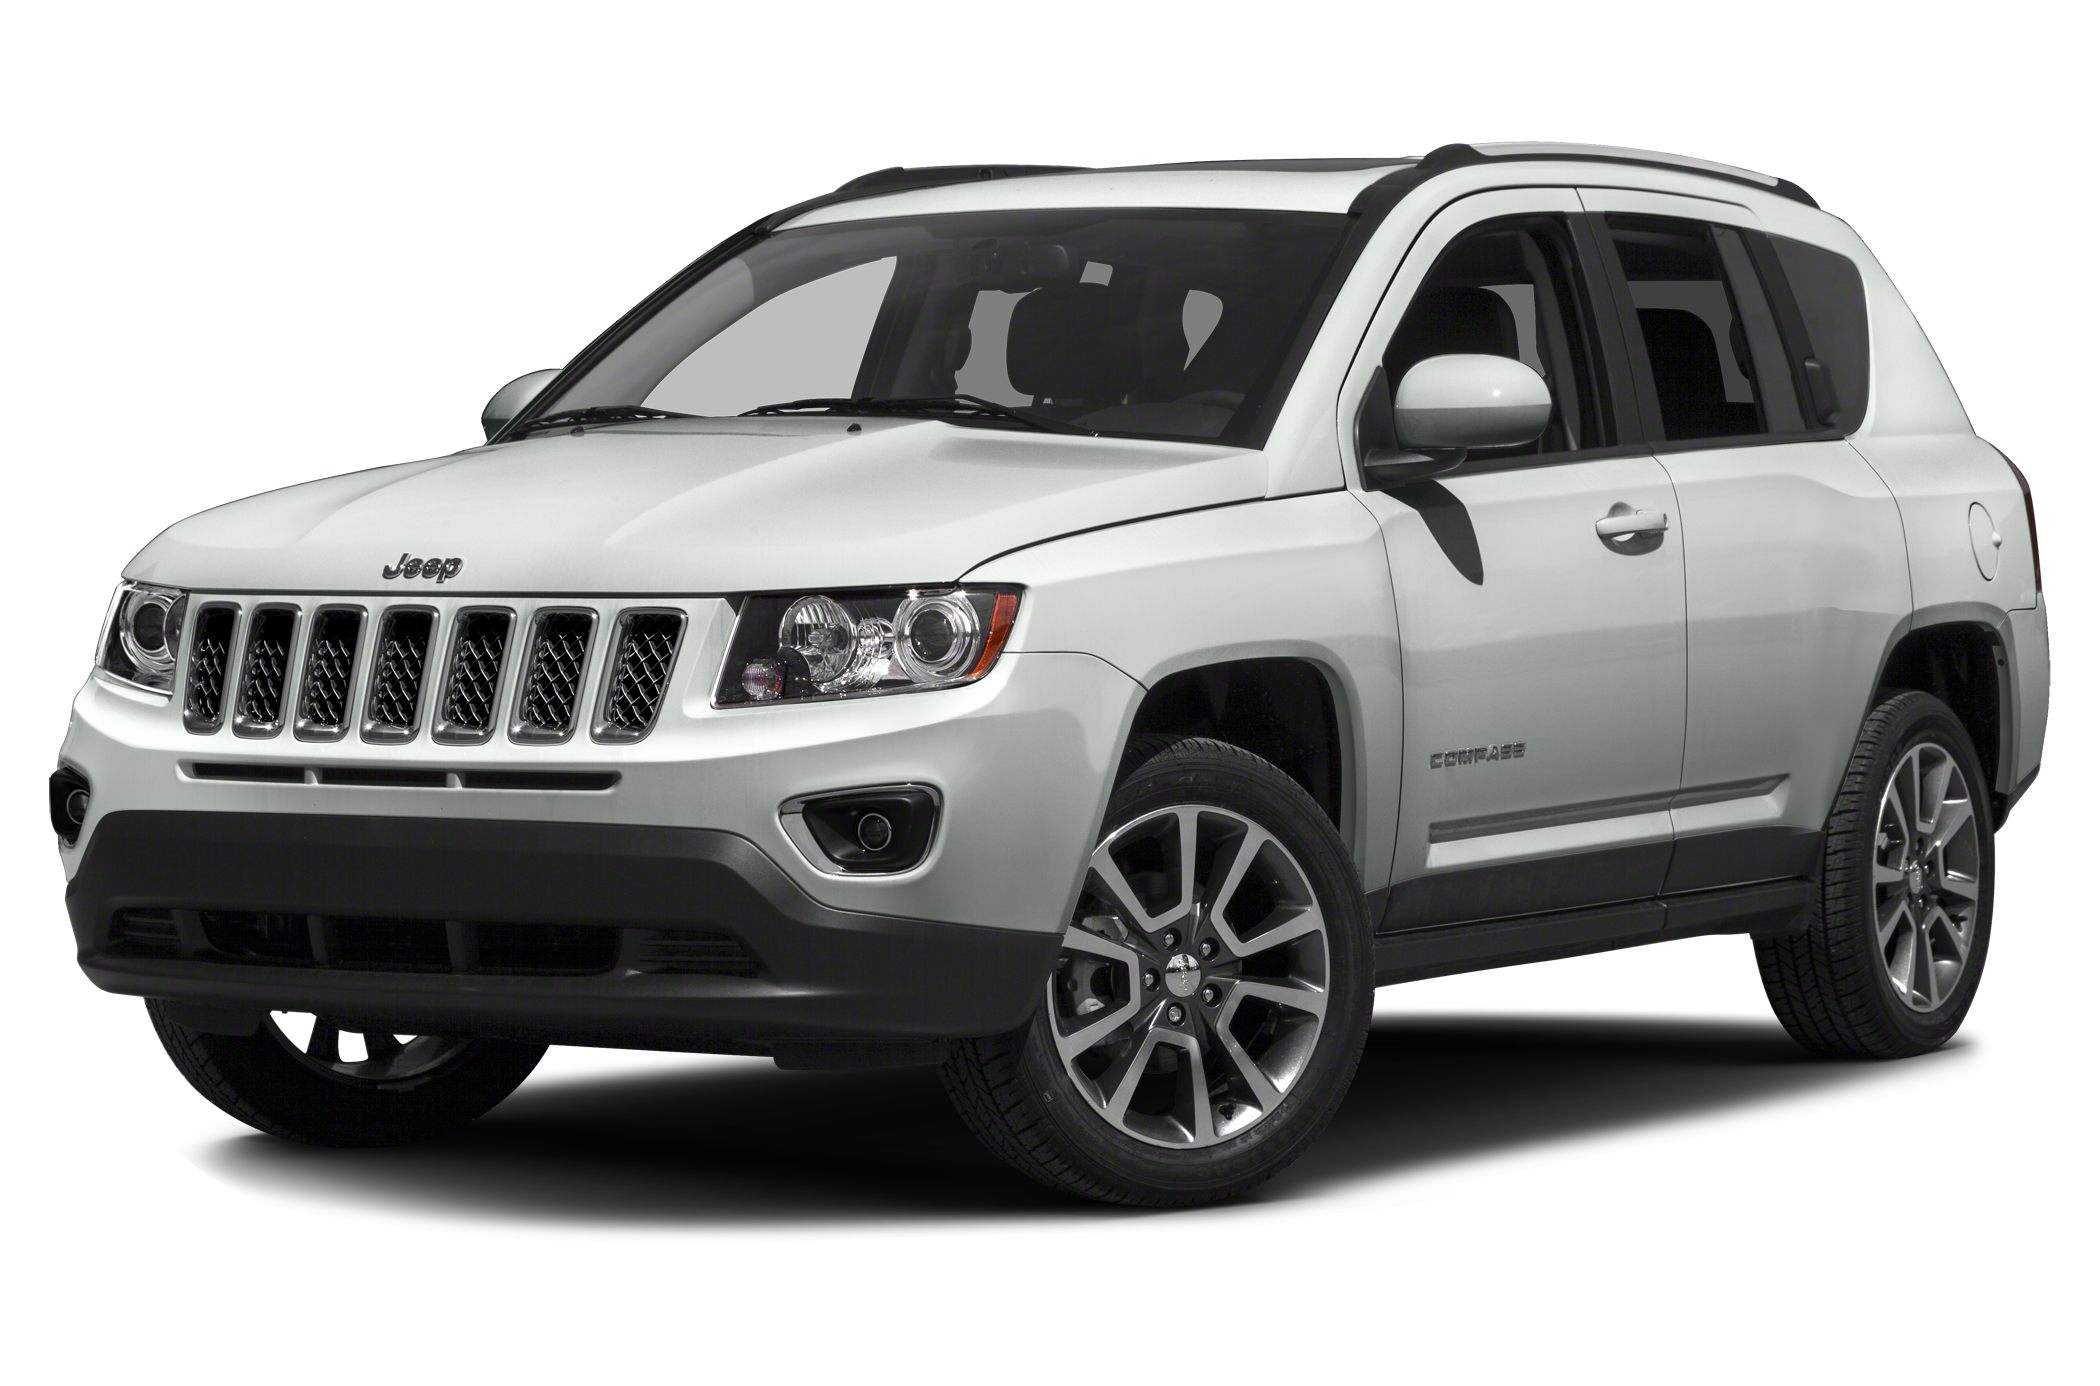 Jeep compass rallye package from mopar review #4